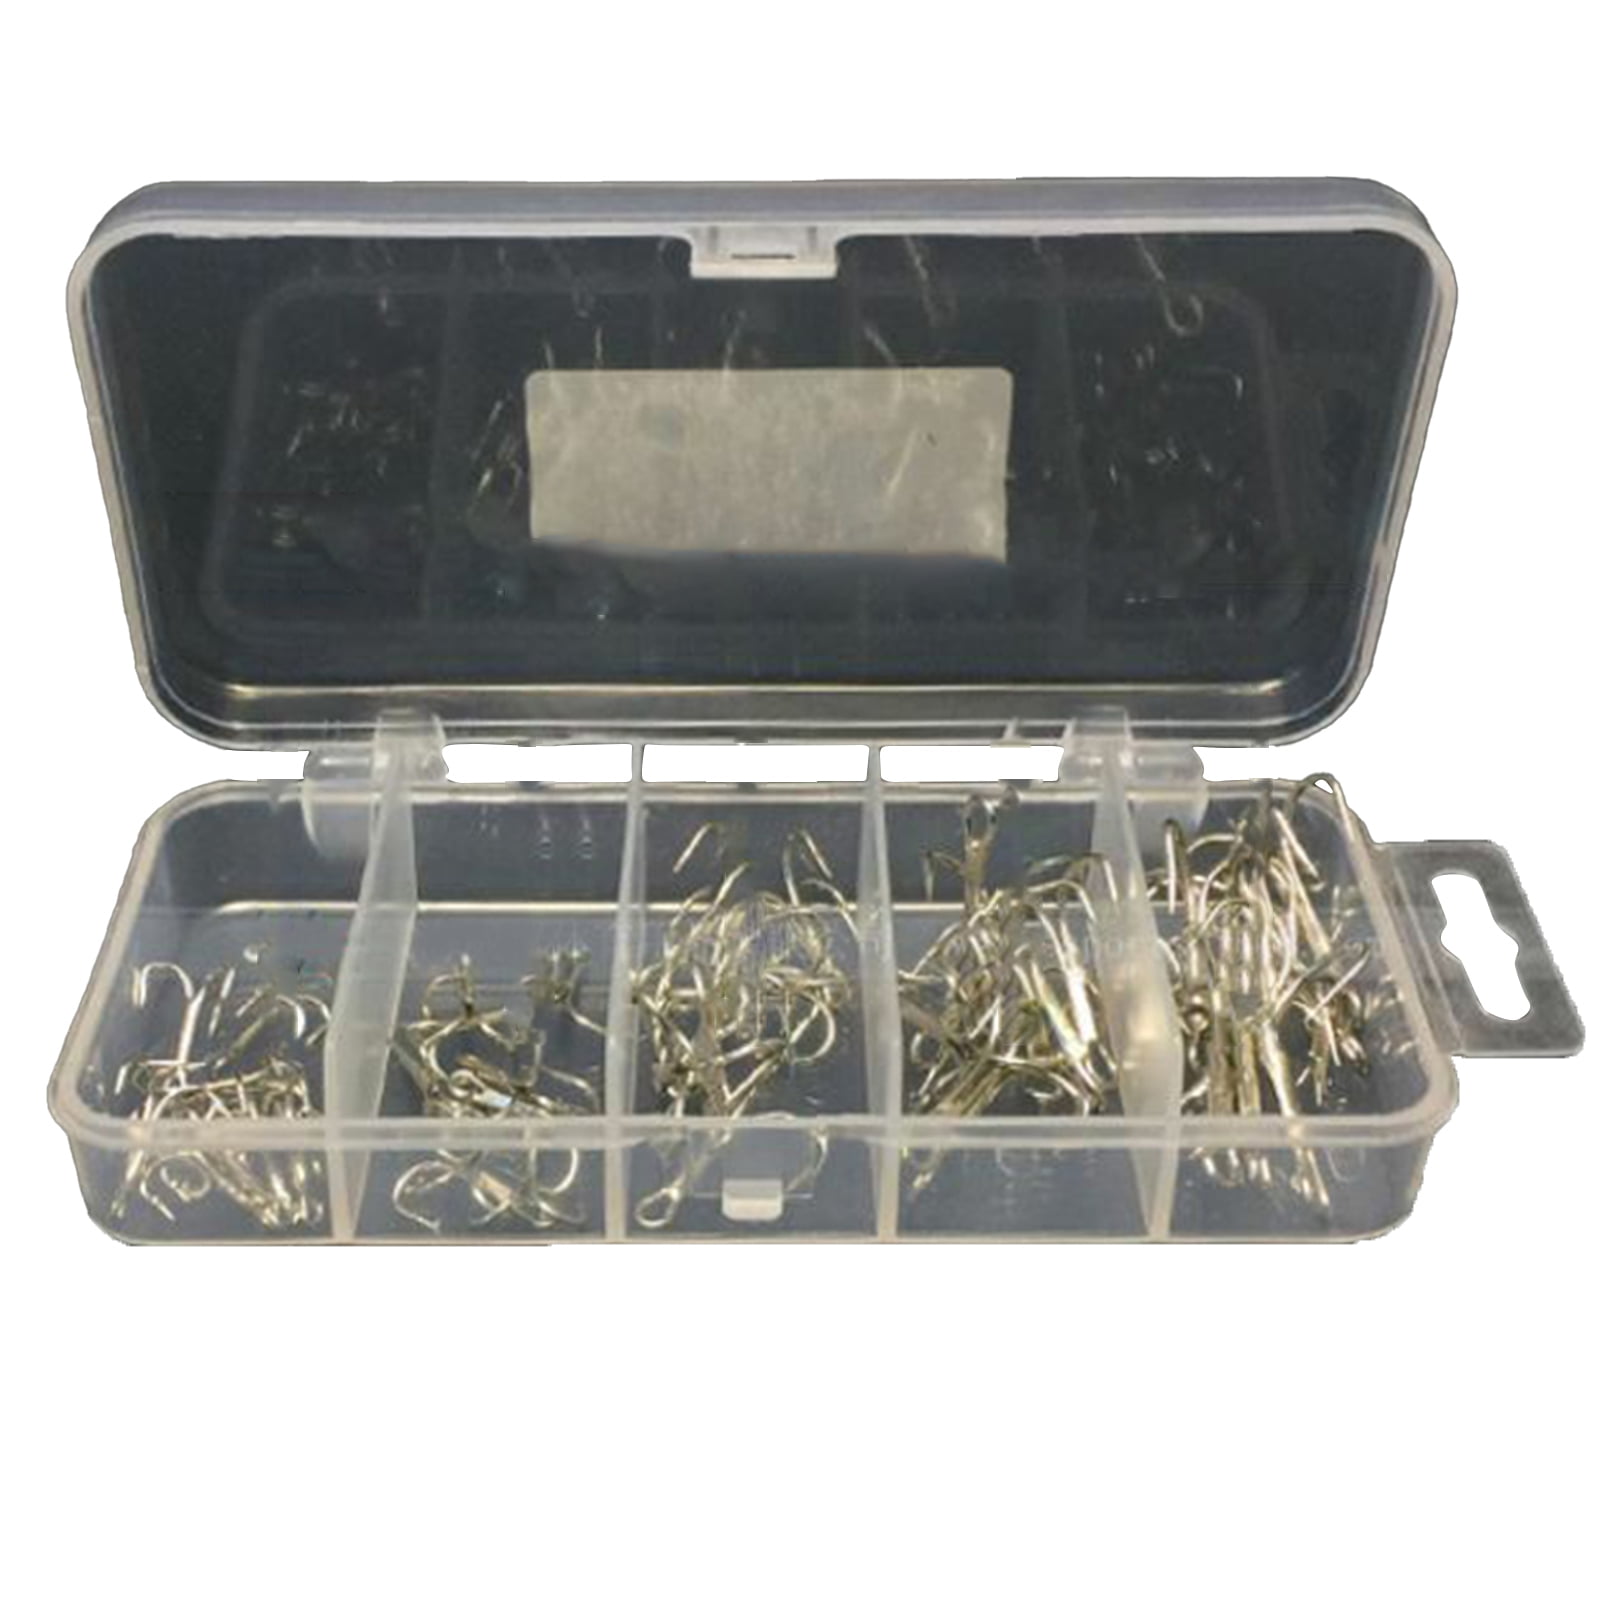 50 Piece 2/4/6/8/10 Size filed Triplet Tackle Tool Box Healthy Fish